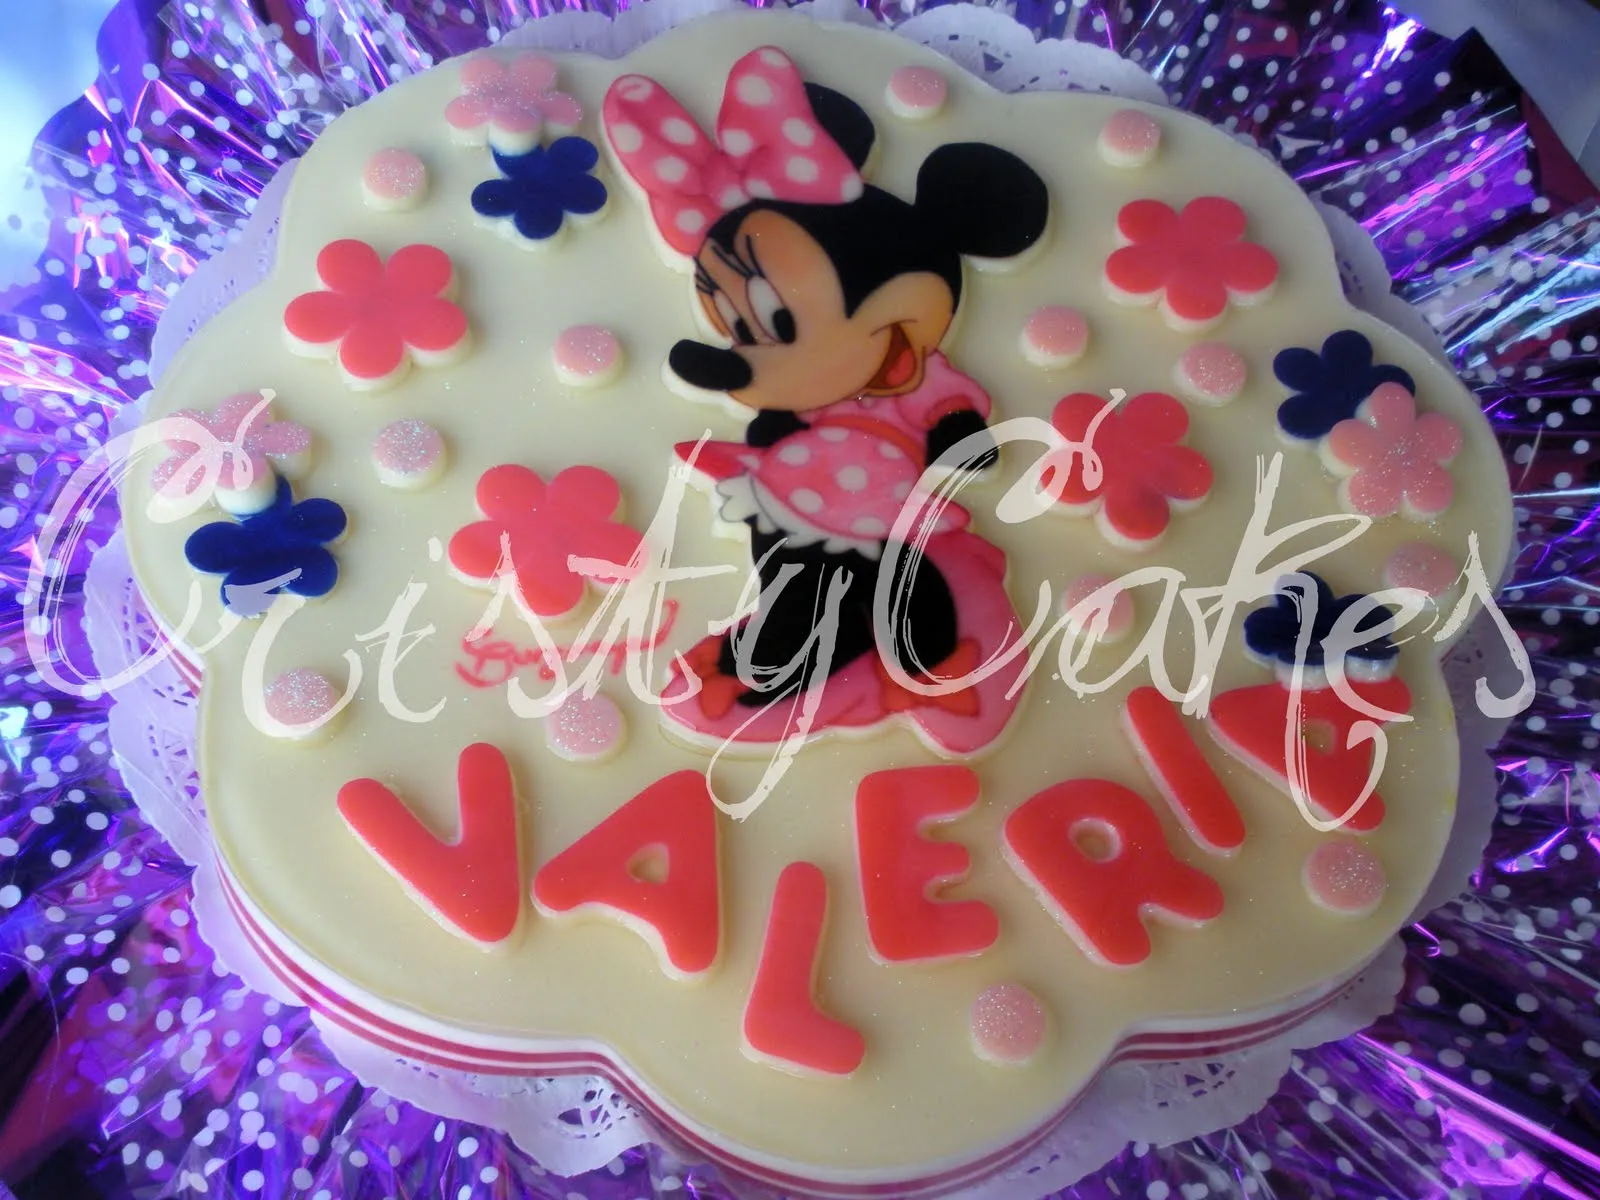 Cristy's Cakes: MInnie Mouse